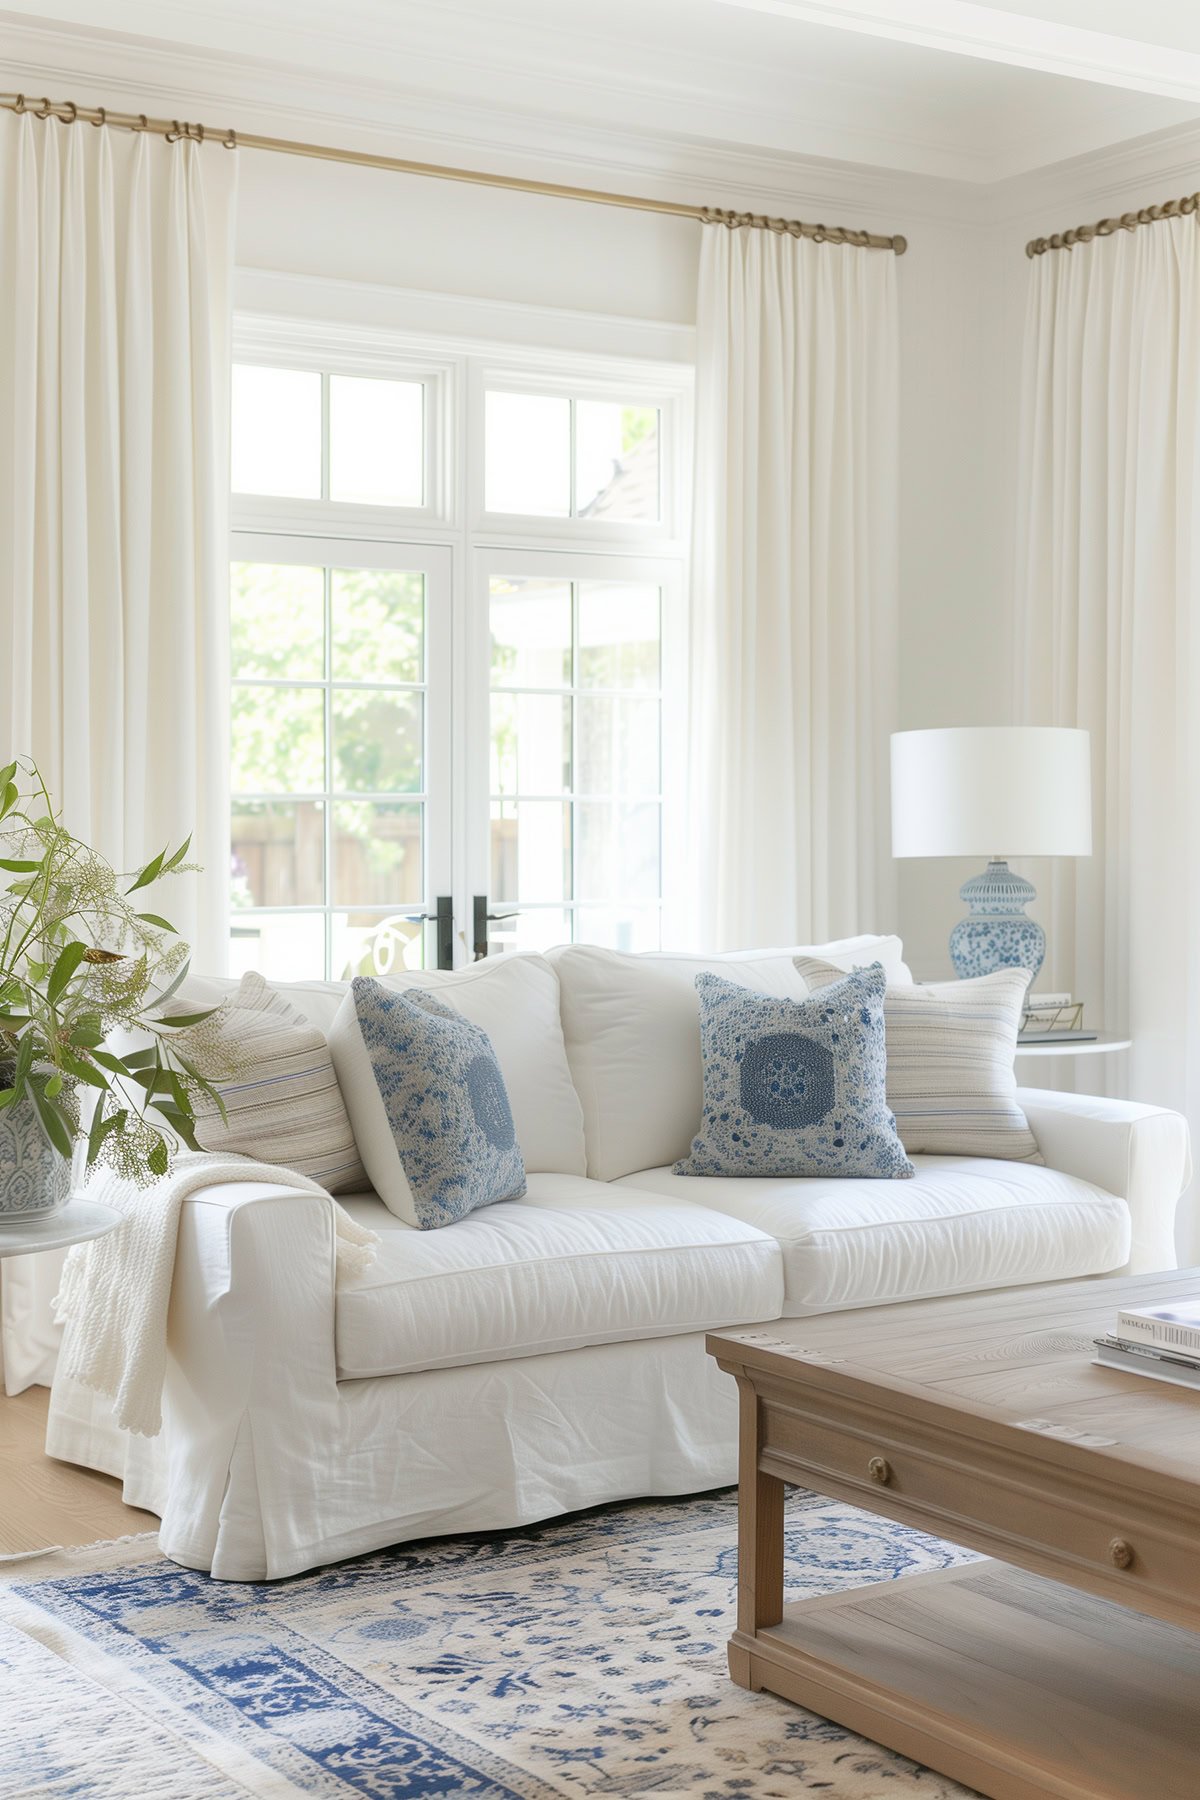 Living room with a white sofa and walls painted Sherwin Williams Crushed Ice, a neutral greige paint color.